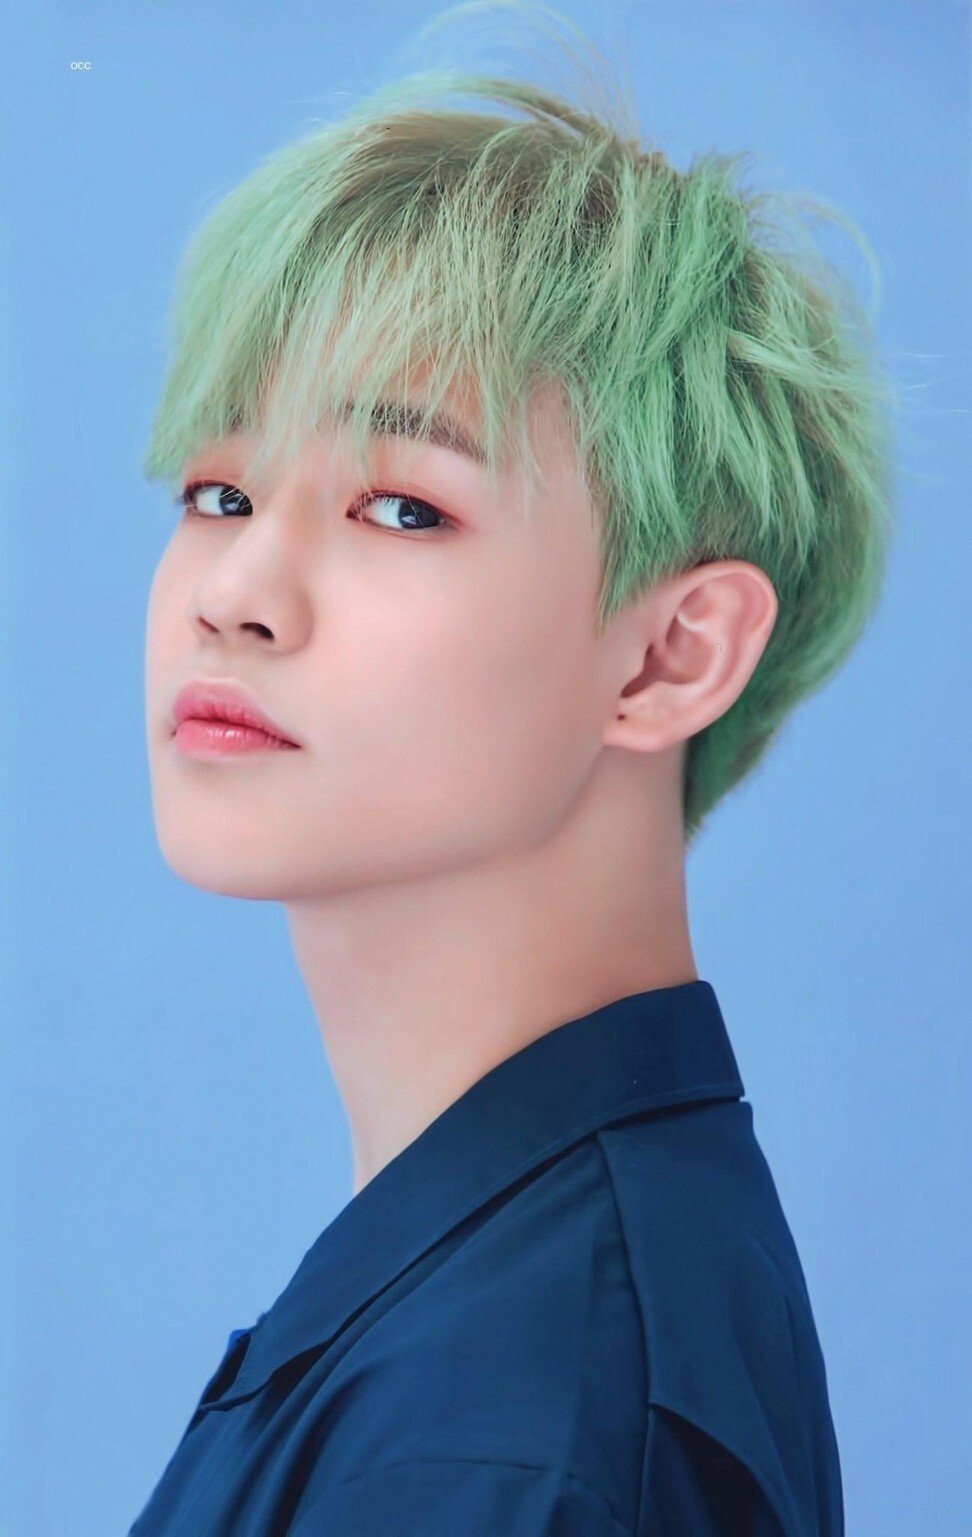 Chenle of NCT: the Chinese child star who moved to South Korea to 